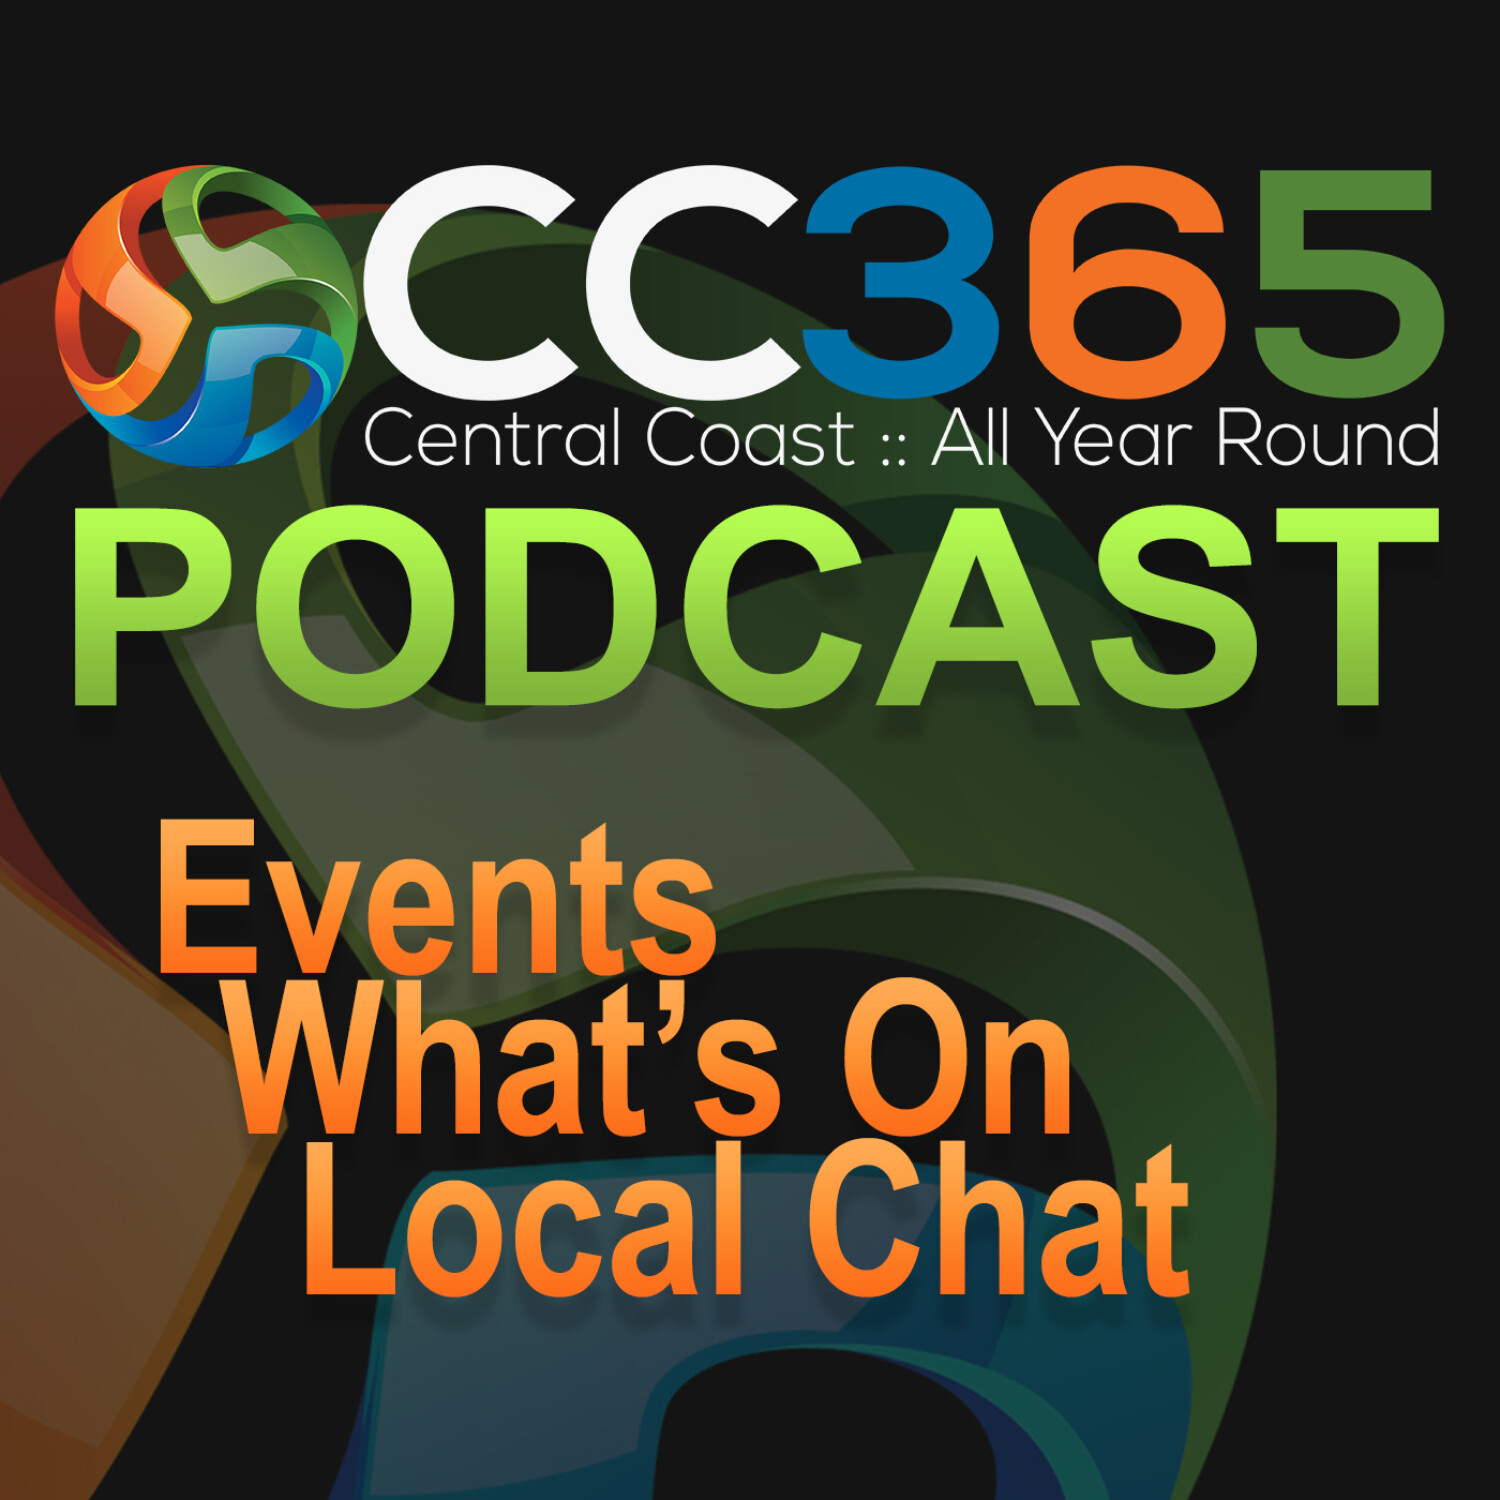 016 CC365 Podcast with Kabba MK